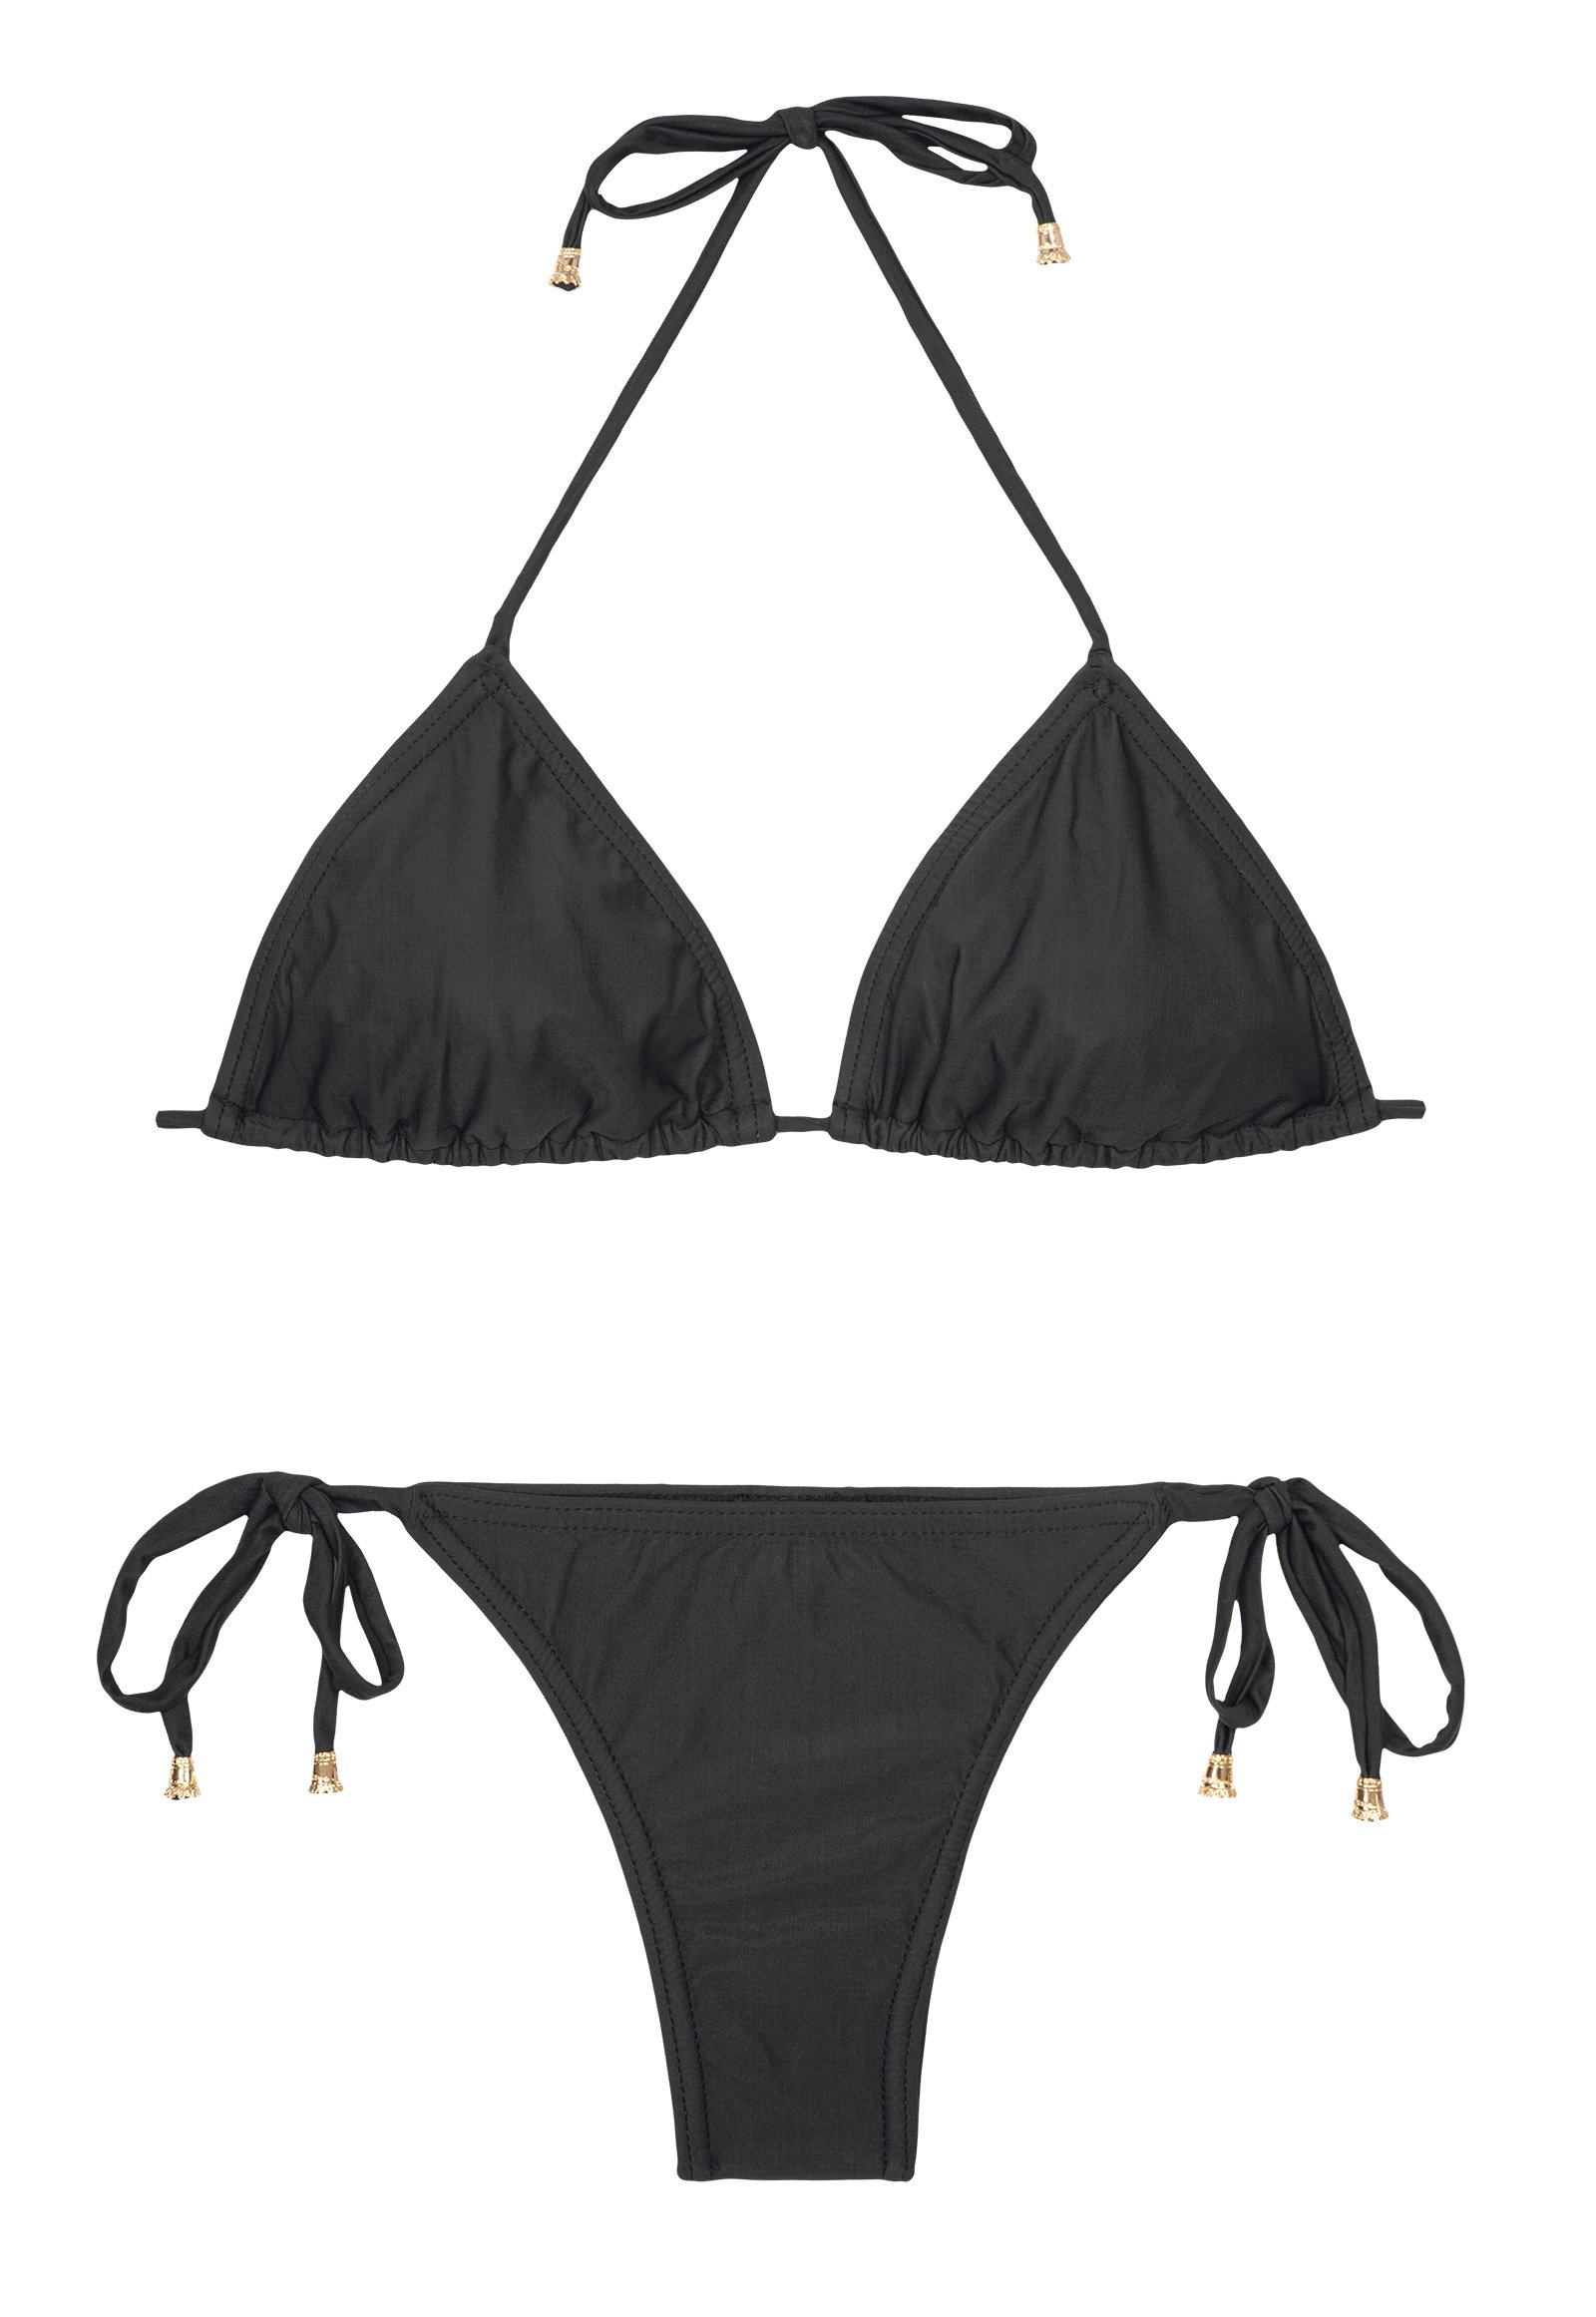 Solid Black Bathing Suit With Very Low Cut Bottom - Essencial Preto